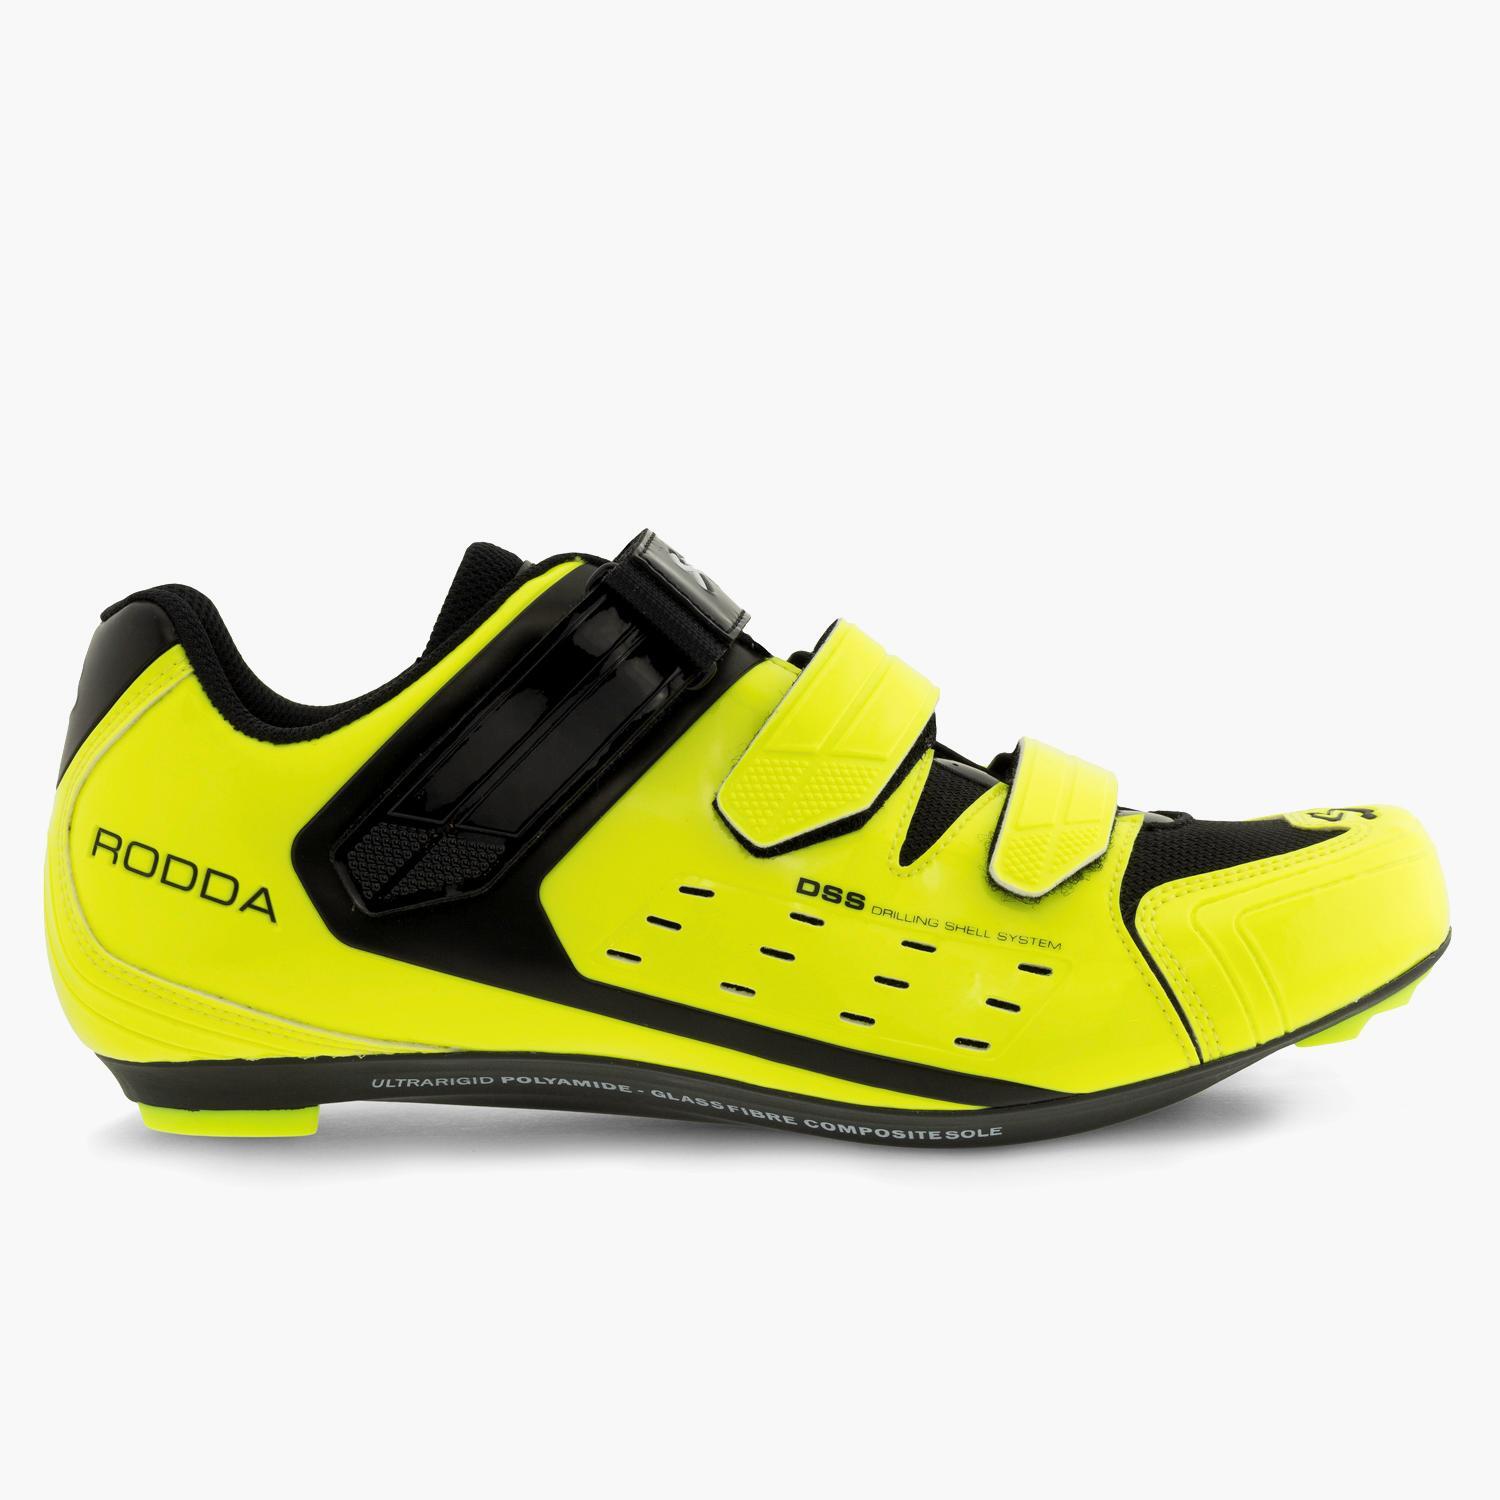 Spiuk Rodda - Jaune - Chaussures de cyclisme homme sports MKP taille 43